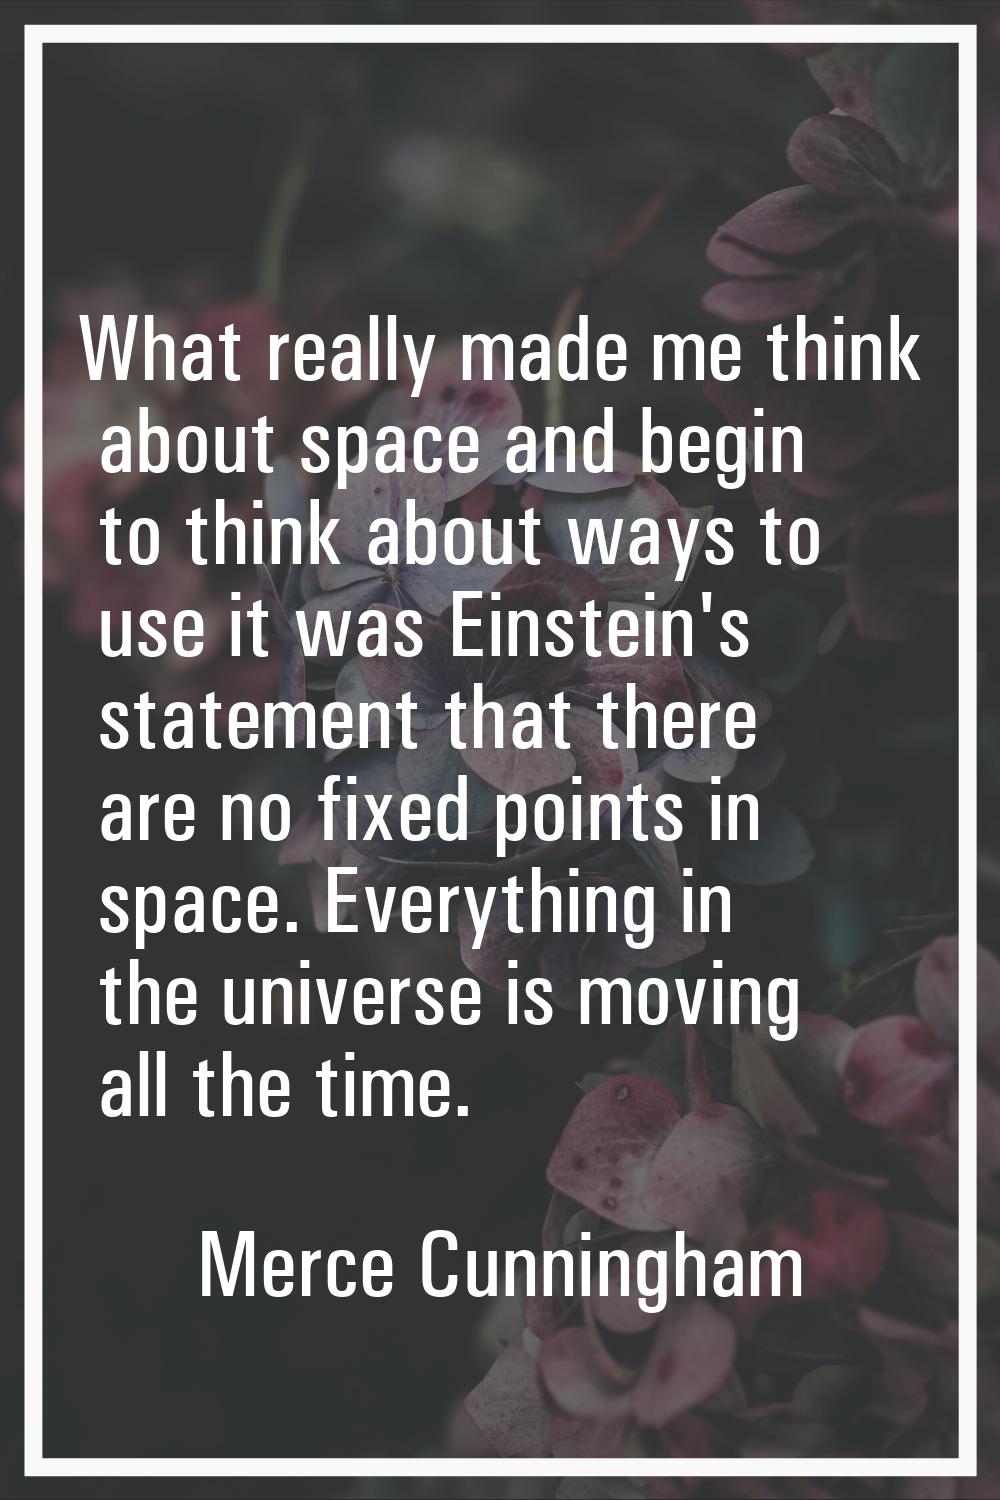 What really made me think about space and begin to think about ways to use it was Einstein's statem